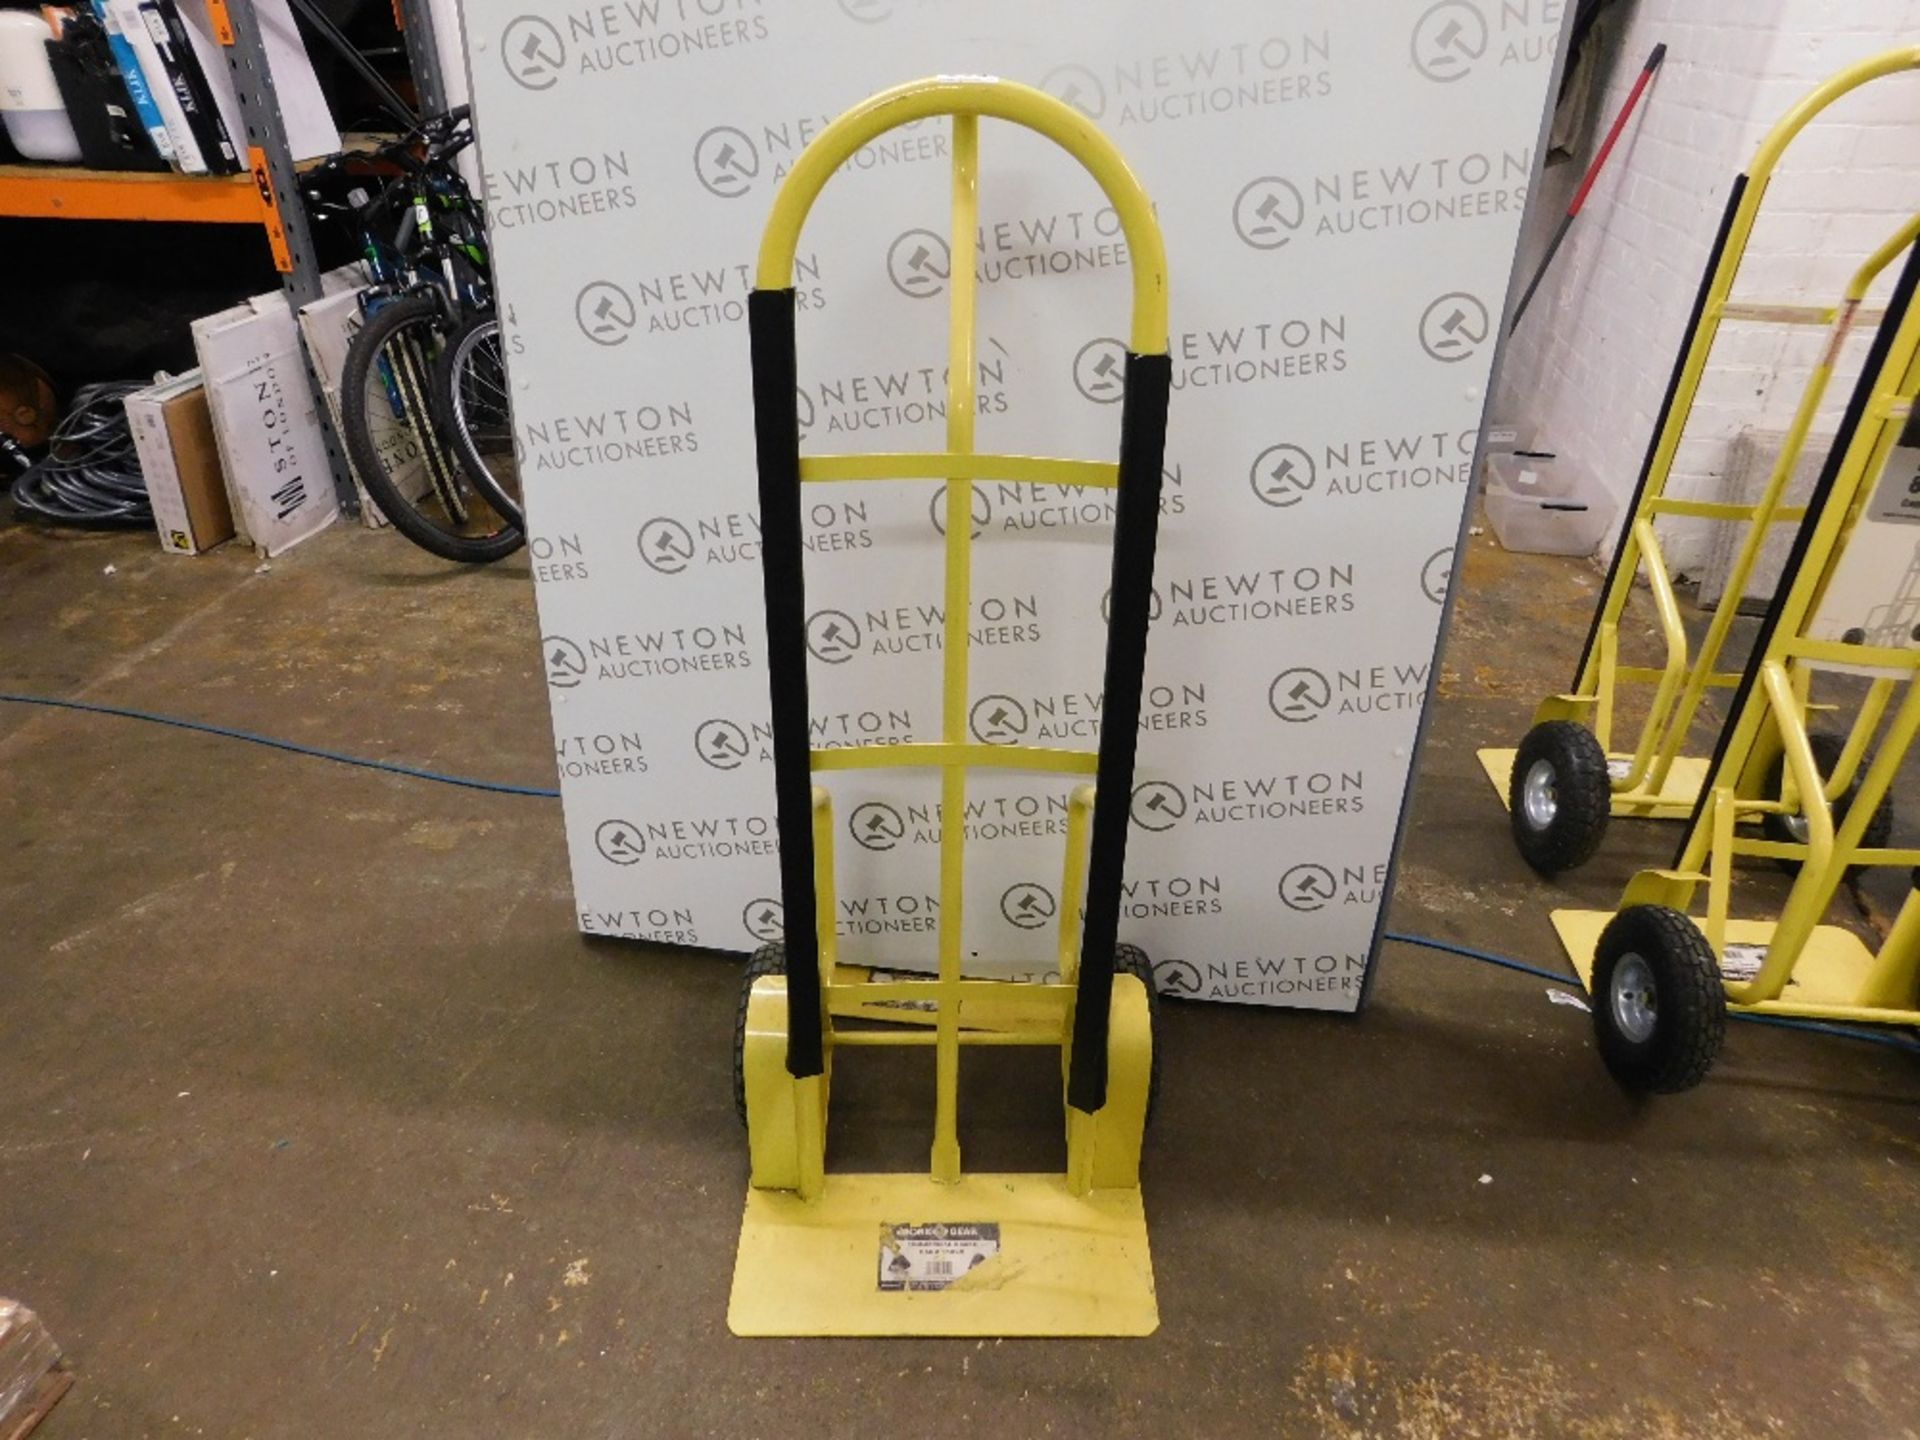 1 WORK GEAR COMMERCIAL GRADE HAND TRUCK 365KG CAPACITY RRP £119.99